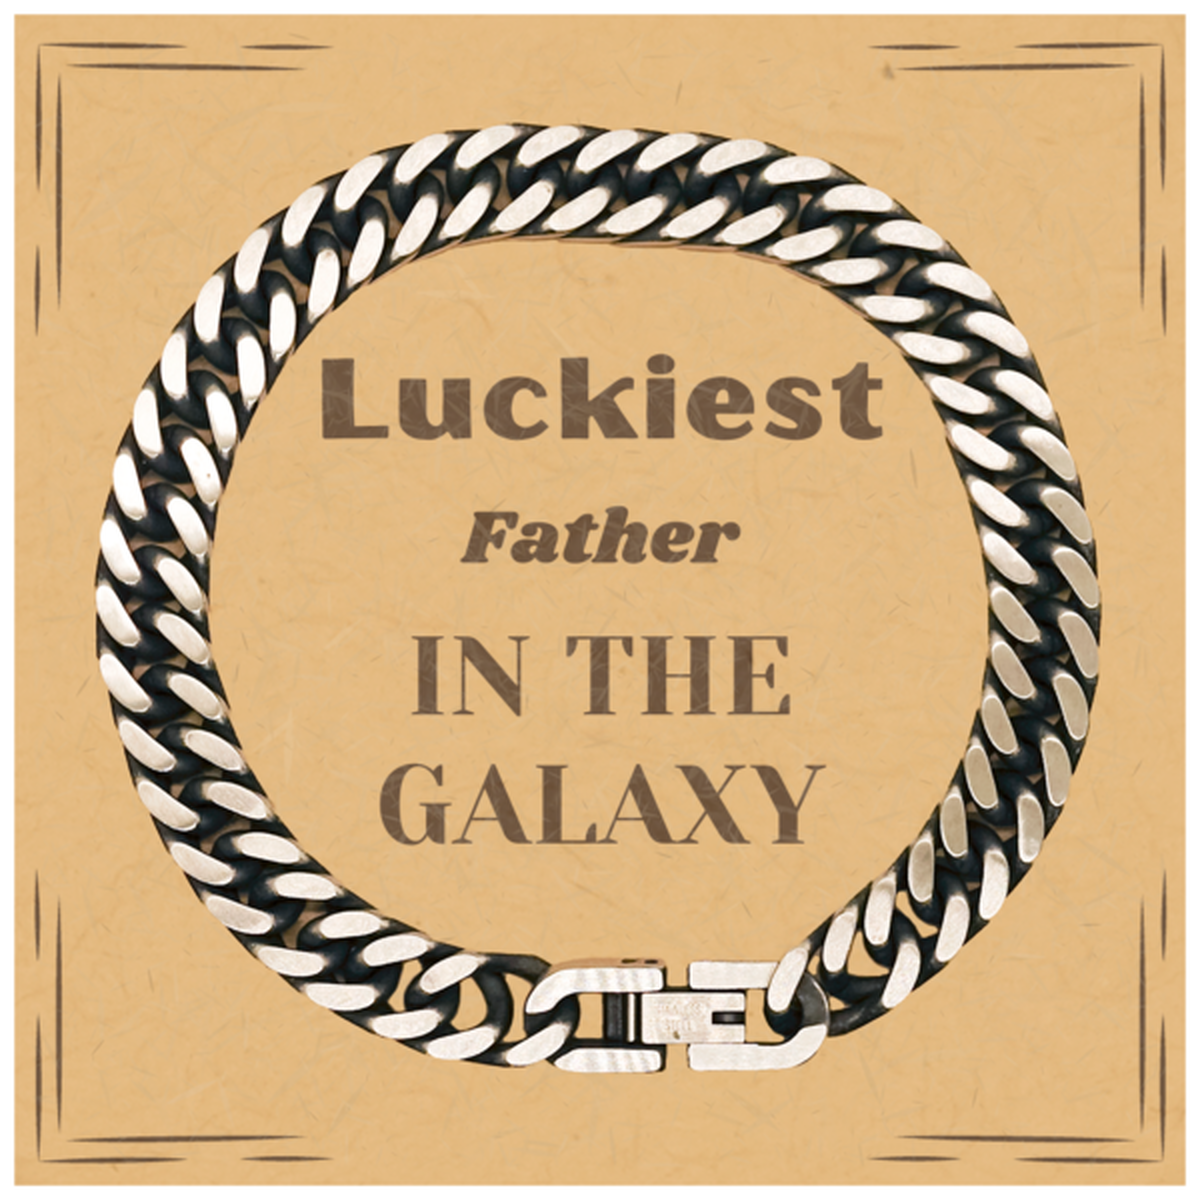 Luckiest Father in the Galaxy, To My Father Message Card Gifts, Christmas Father Cuban Link Chain Bracelet Gifts, X-mas Birthday Unique Gifts For Father Men Women